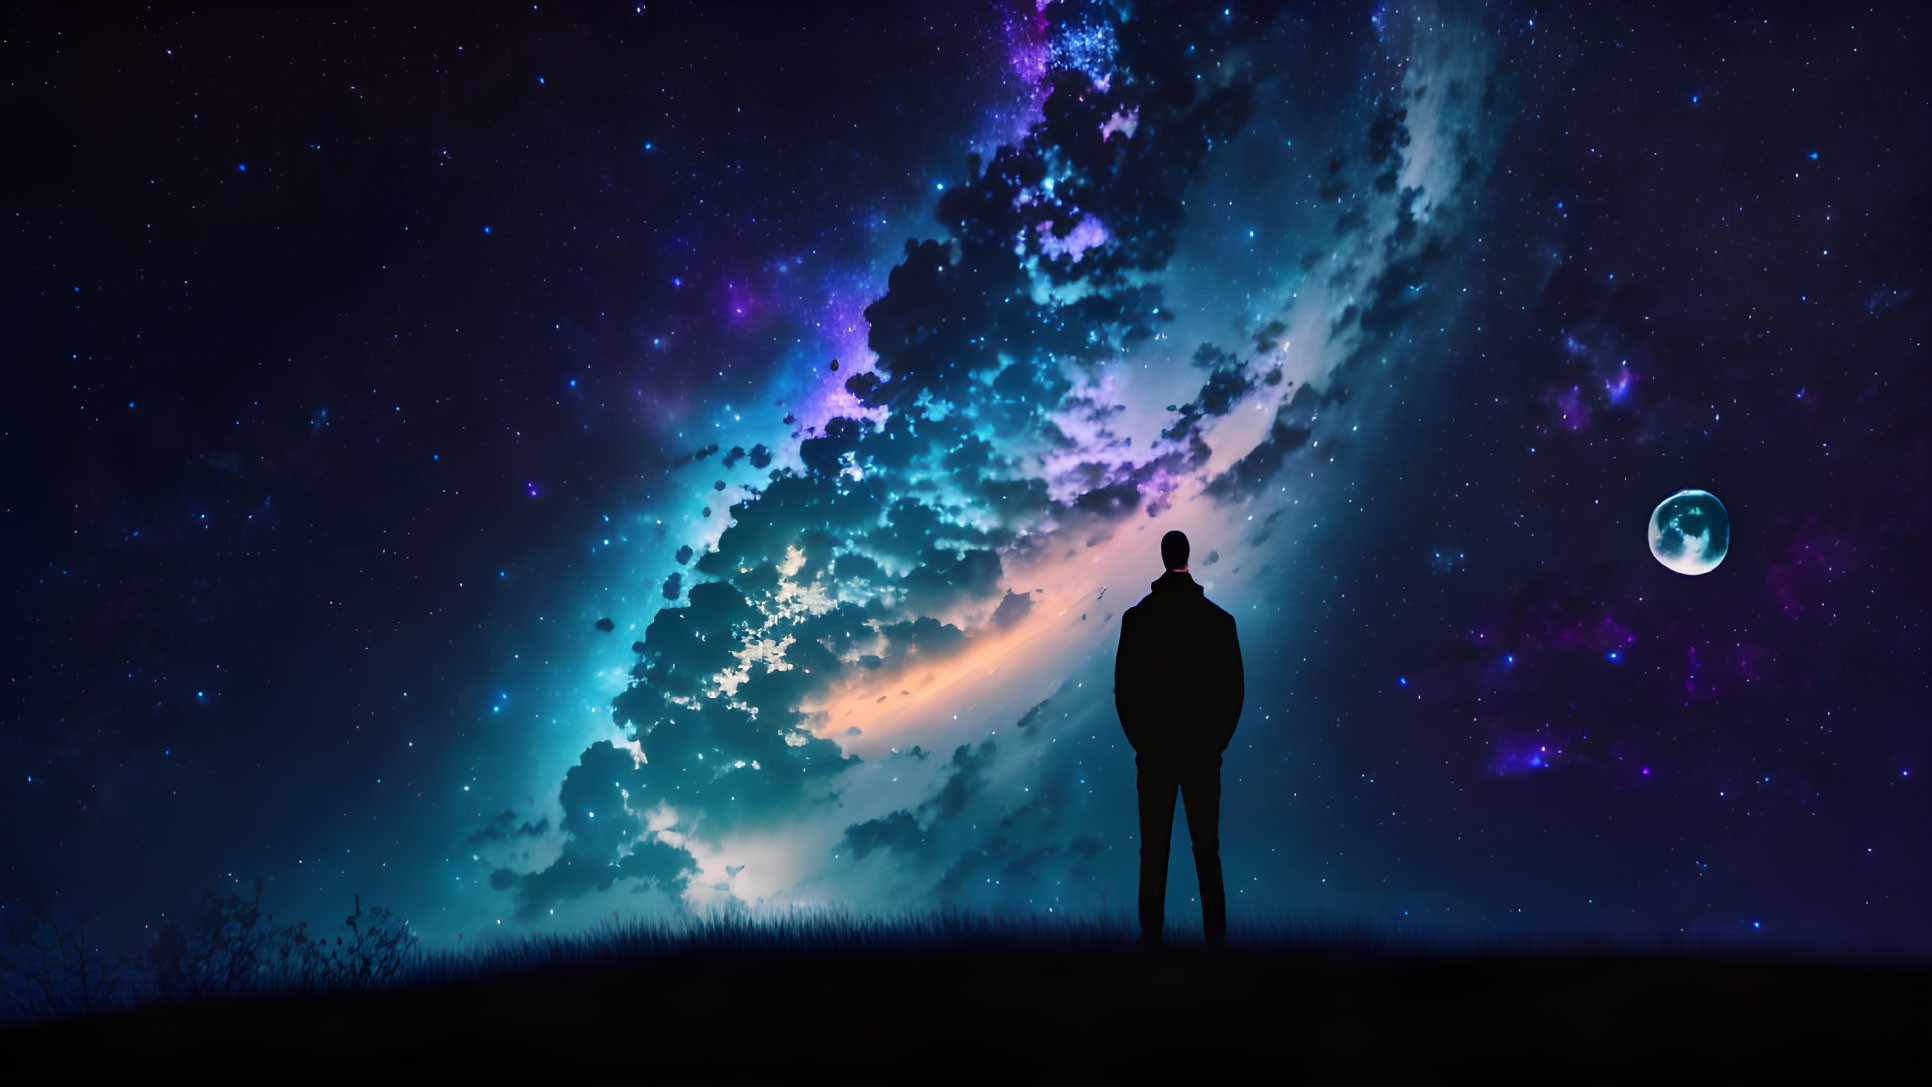 Silhouette of person on hill under starry sky with galaxy and moon